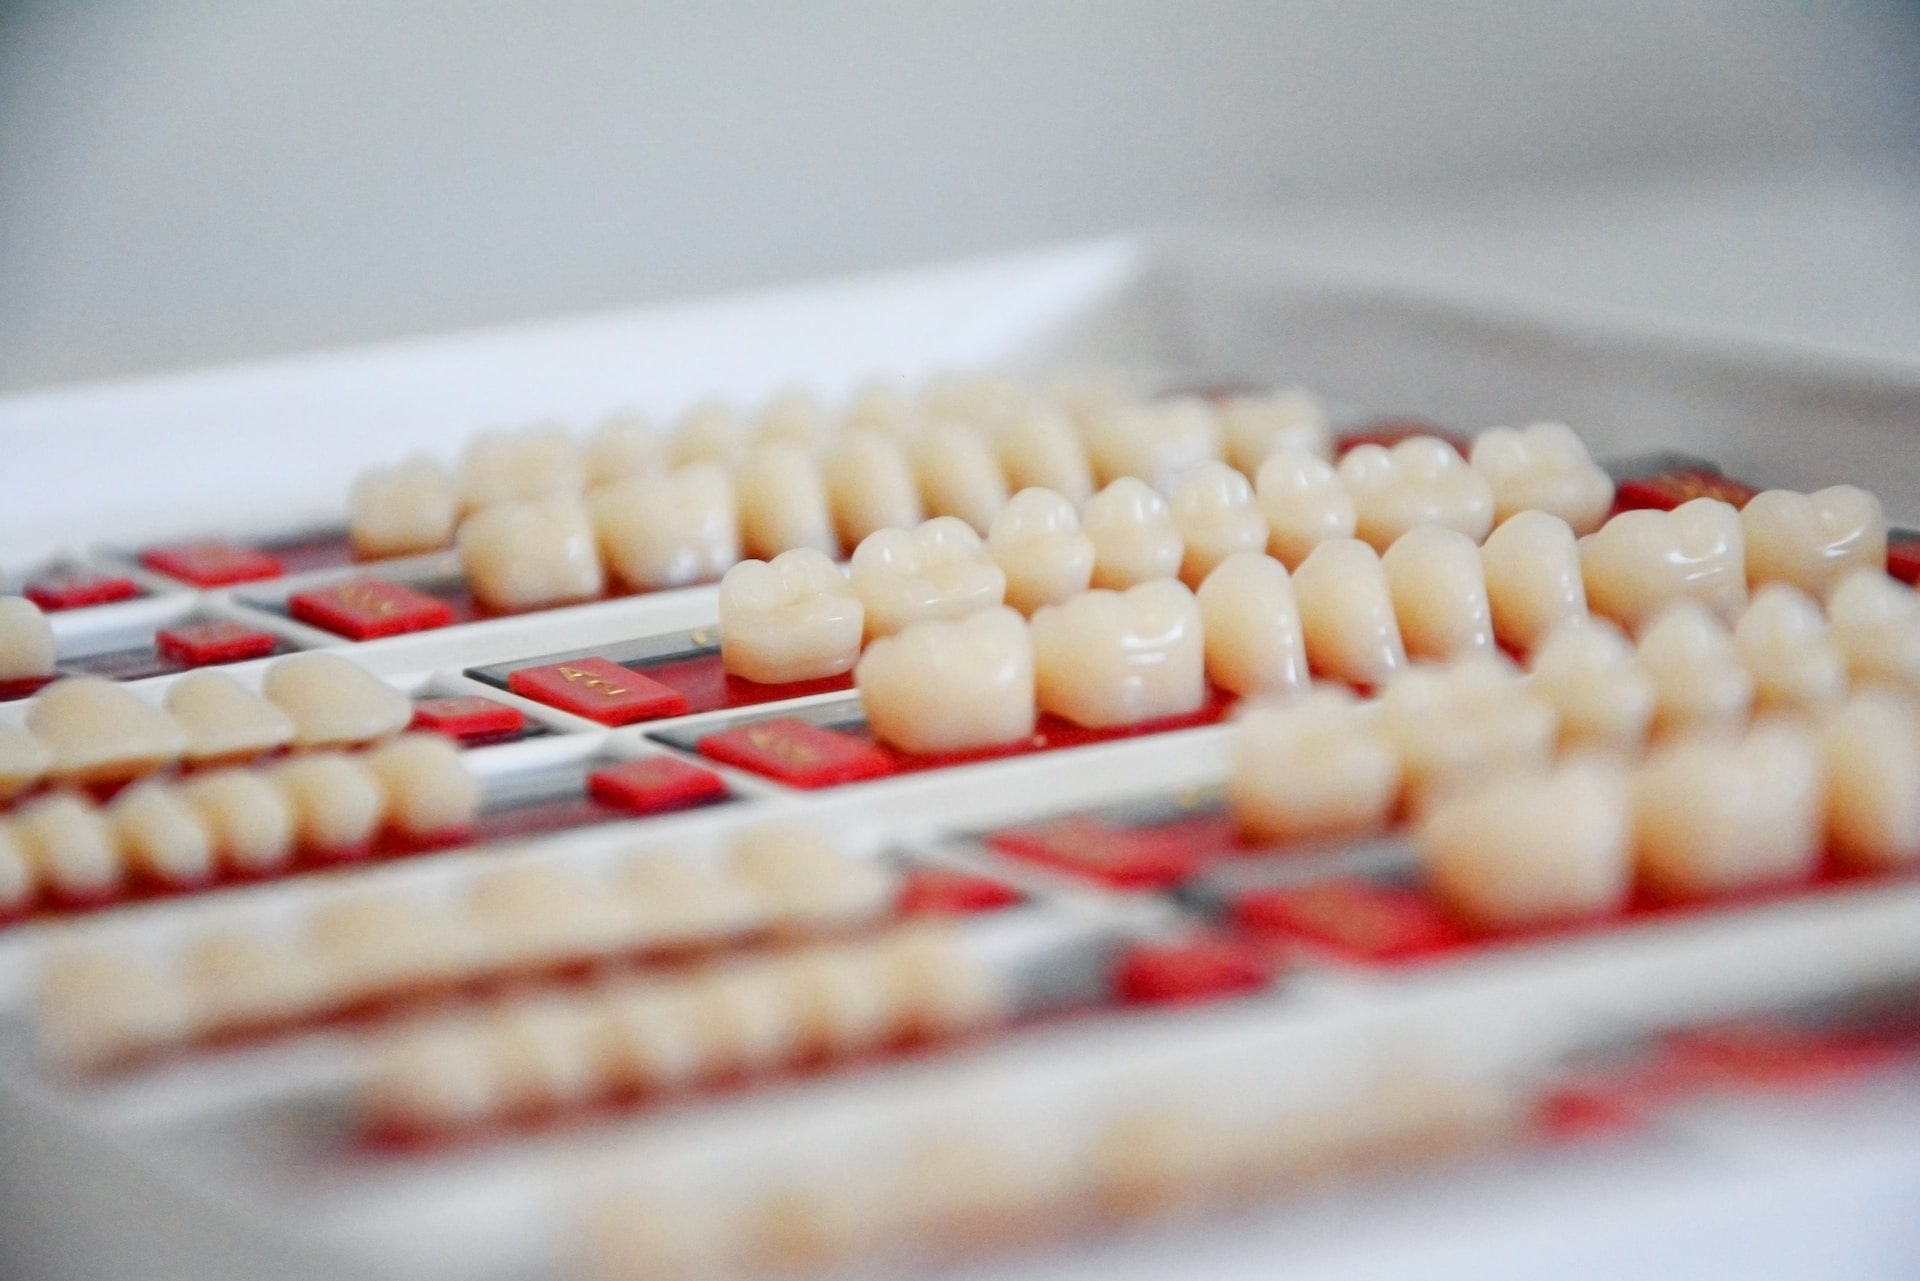 dental implants in different shapes and sizes to show what are dental crowns made of